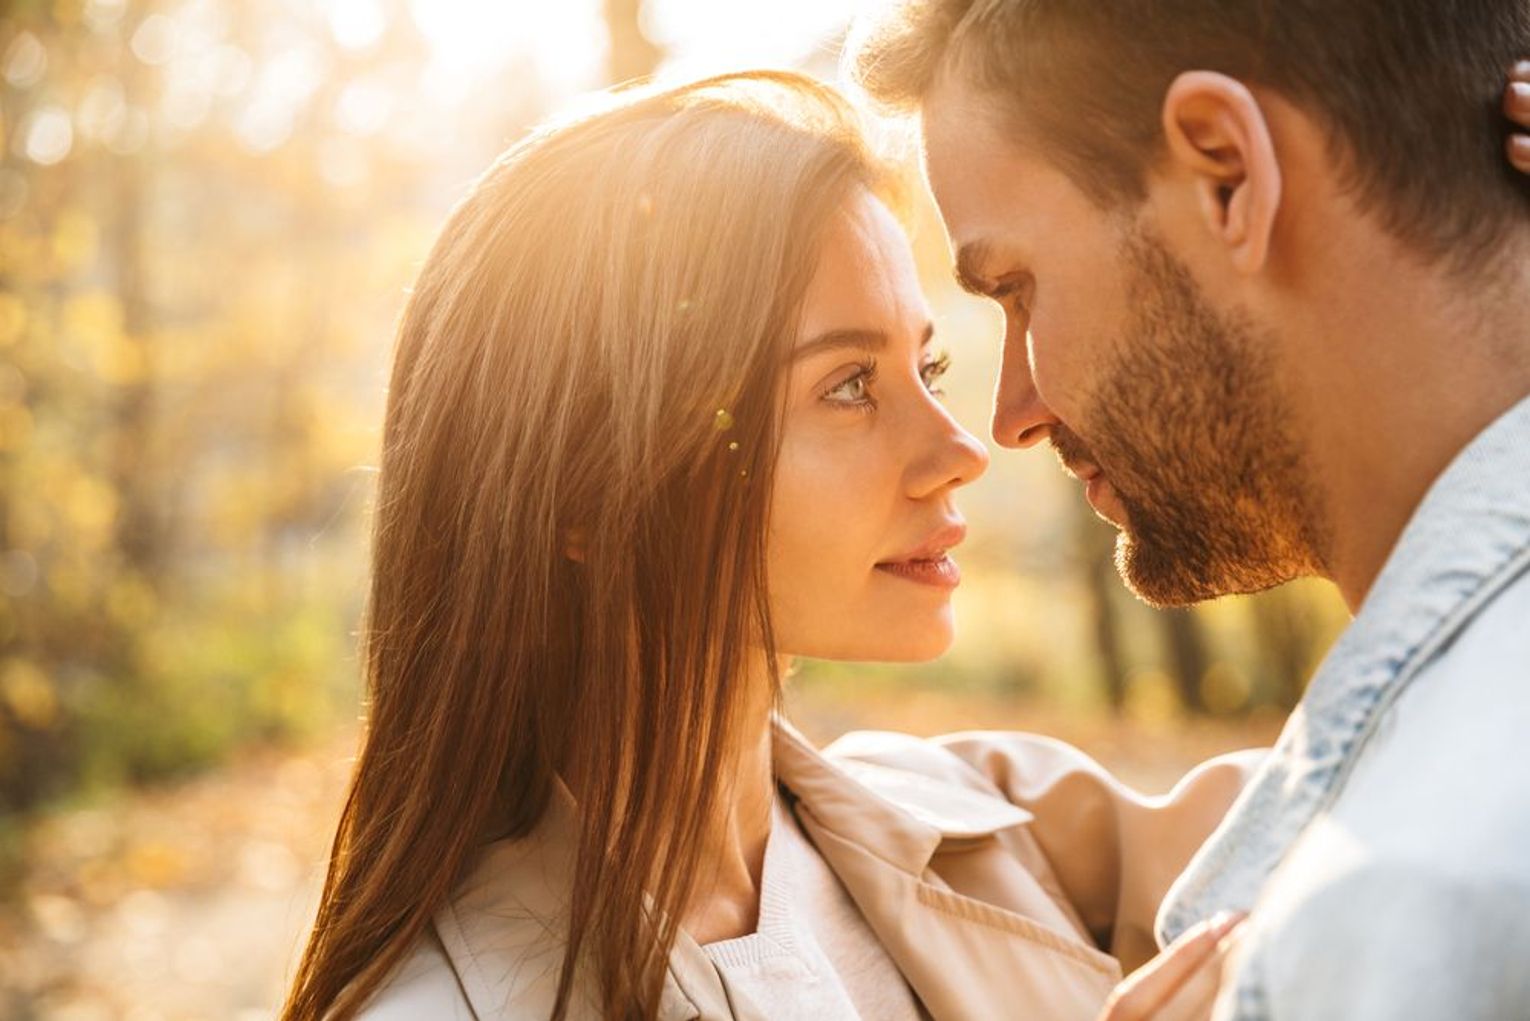 How to Be More Attracted to Your Lover?